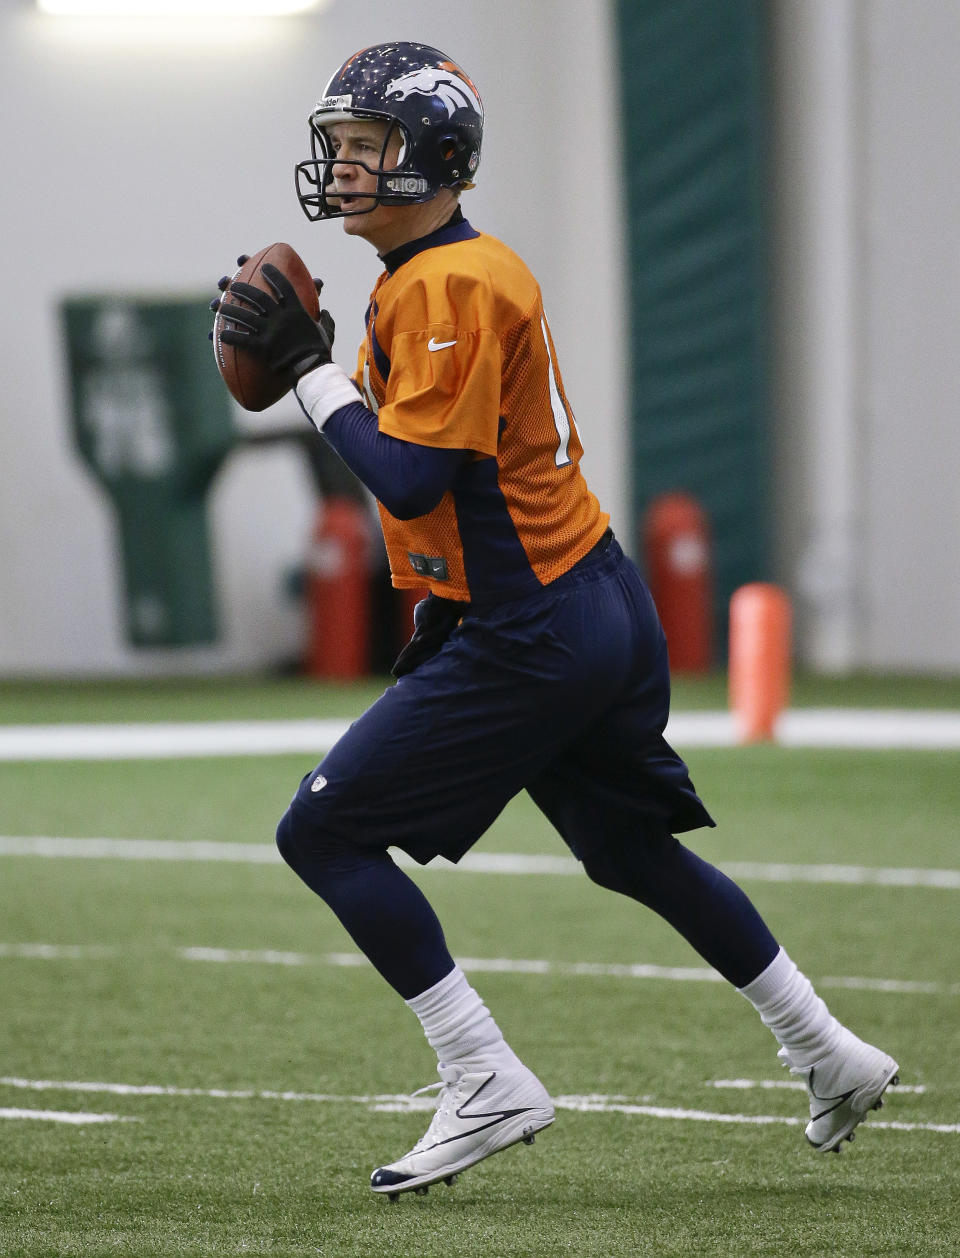 Denver Broncos quarterback Peyton Manning drops back to pass during practice Thursday, Jan. 30, 2014, in Florham Park, N.J. The Broncos are scheduled to play the Seattle Seahawks in the NFL Super Bowl XLVIII football game Sunday, Feb. 2, in East Rutherford, N.J. (AP Photo)